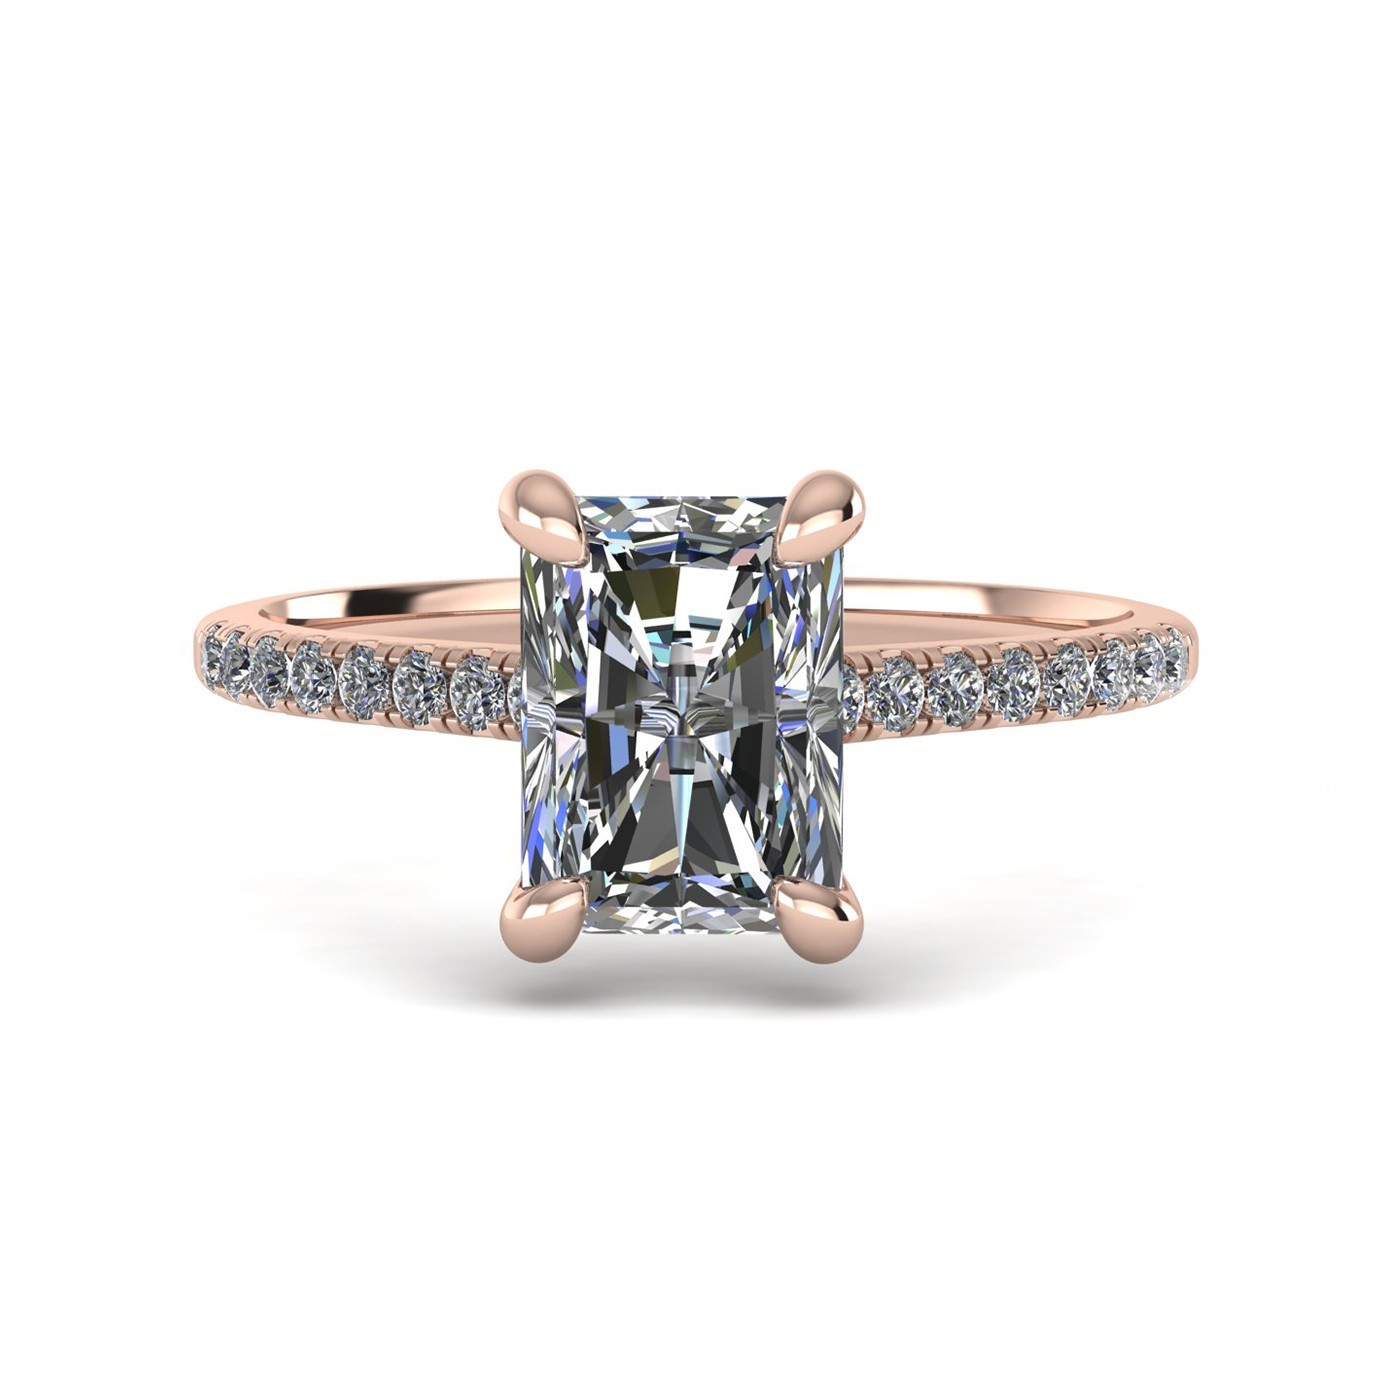 18k rose gold  1,00 ct 4 prongs radiant cut diamond engagement ring with whisper thin pavÉ set band Photos & images